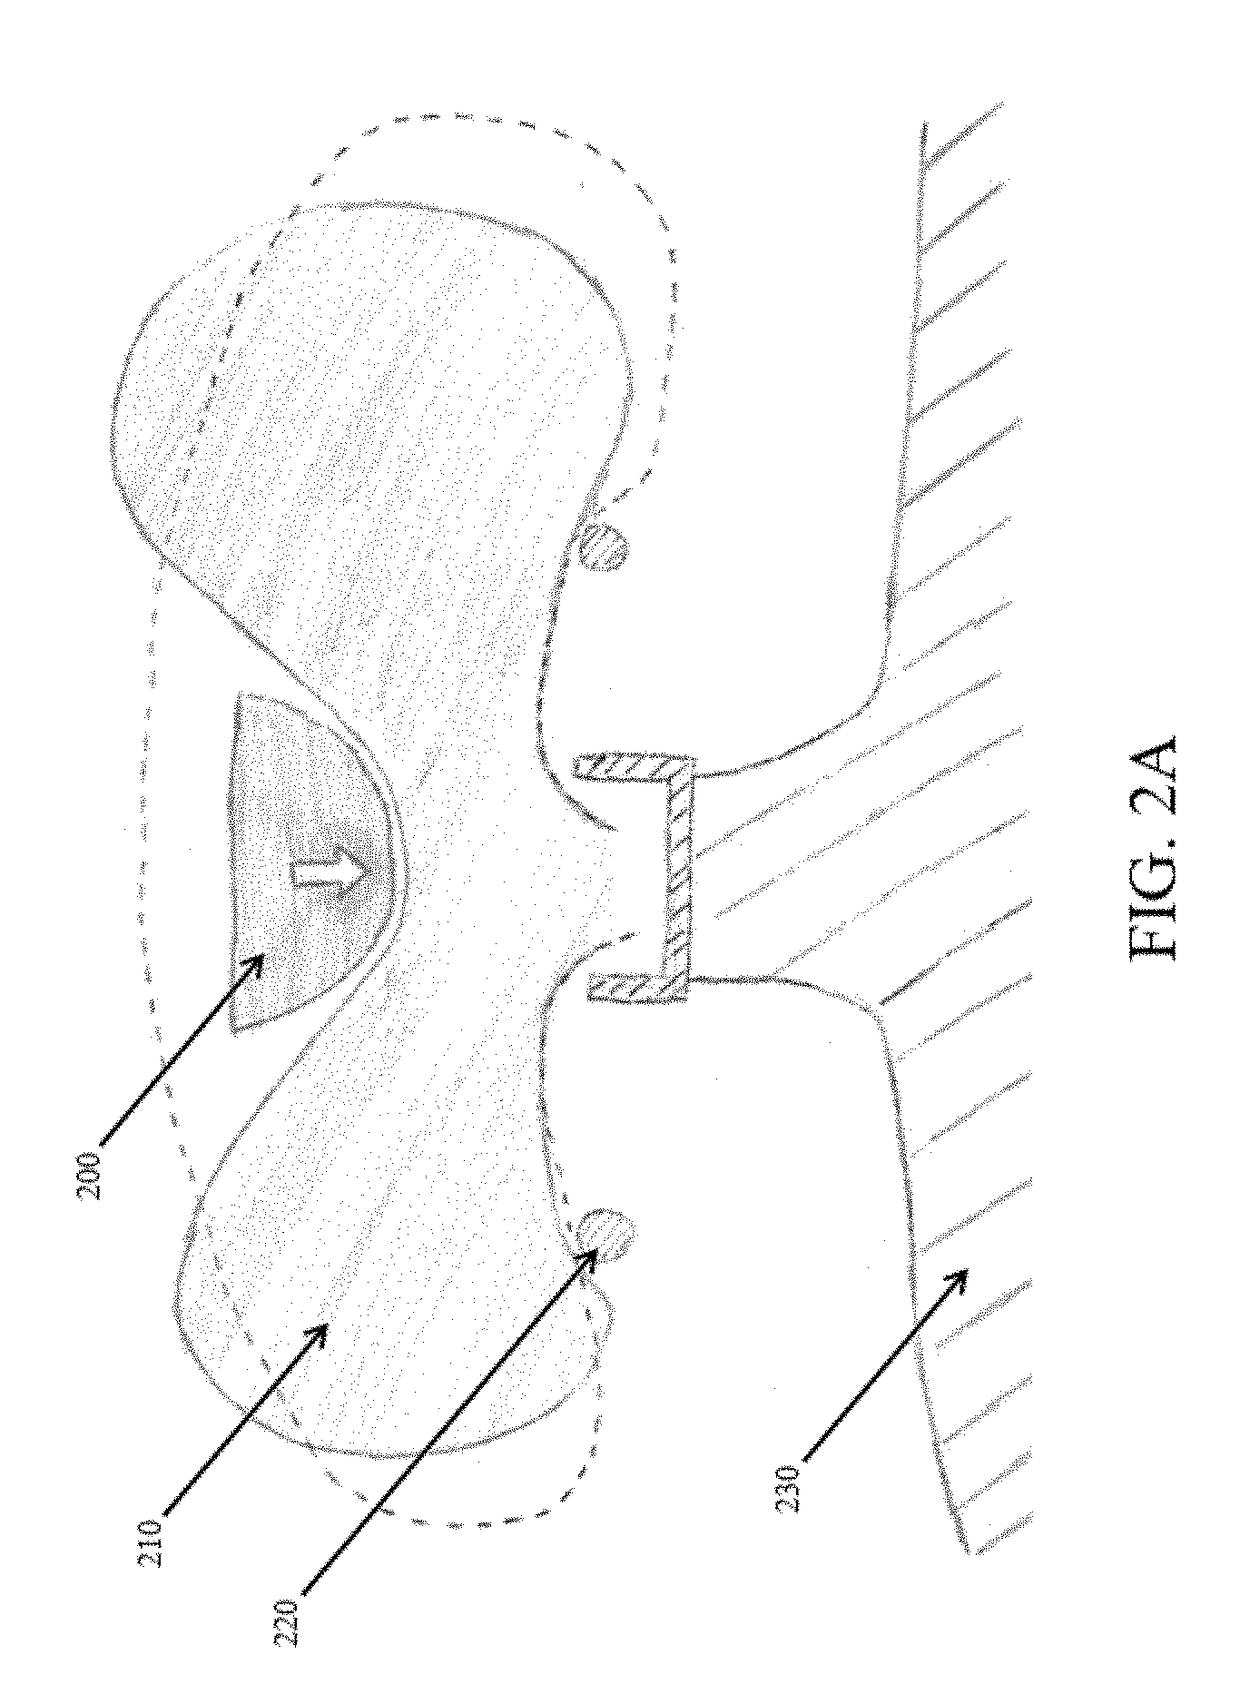 Support surface for primary airbag in vehicle